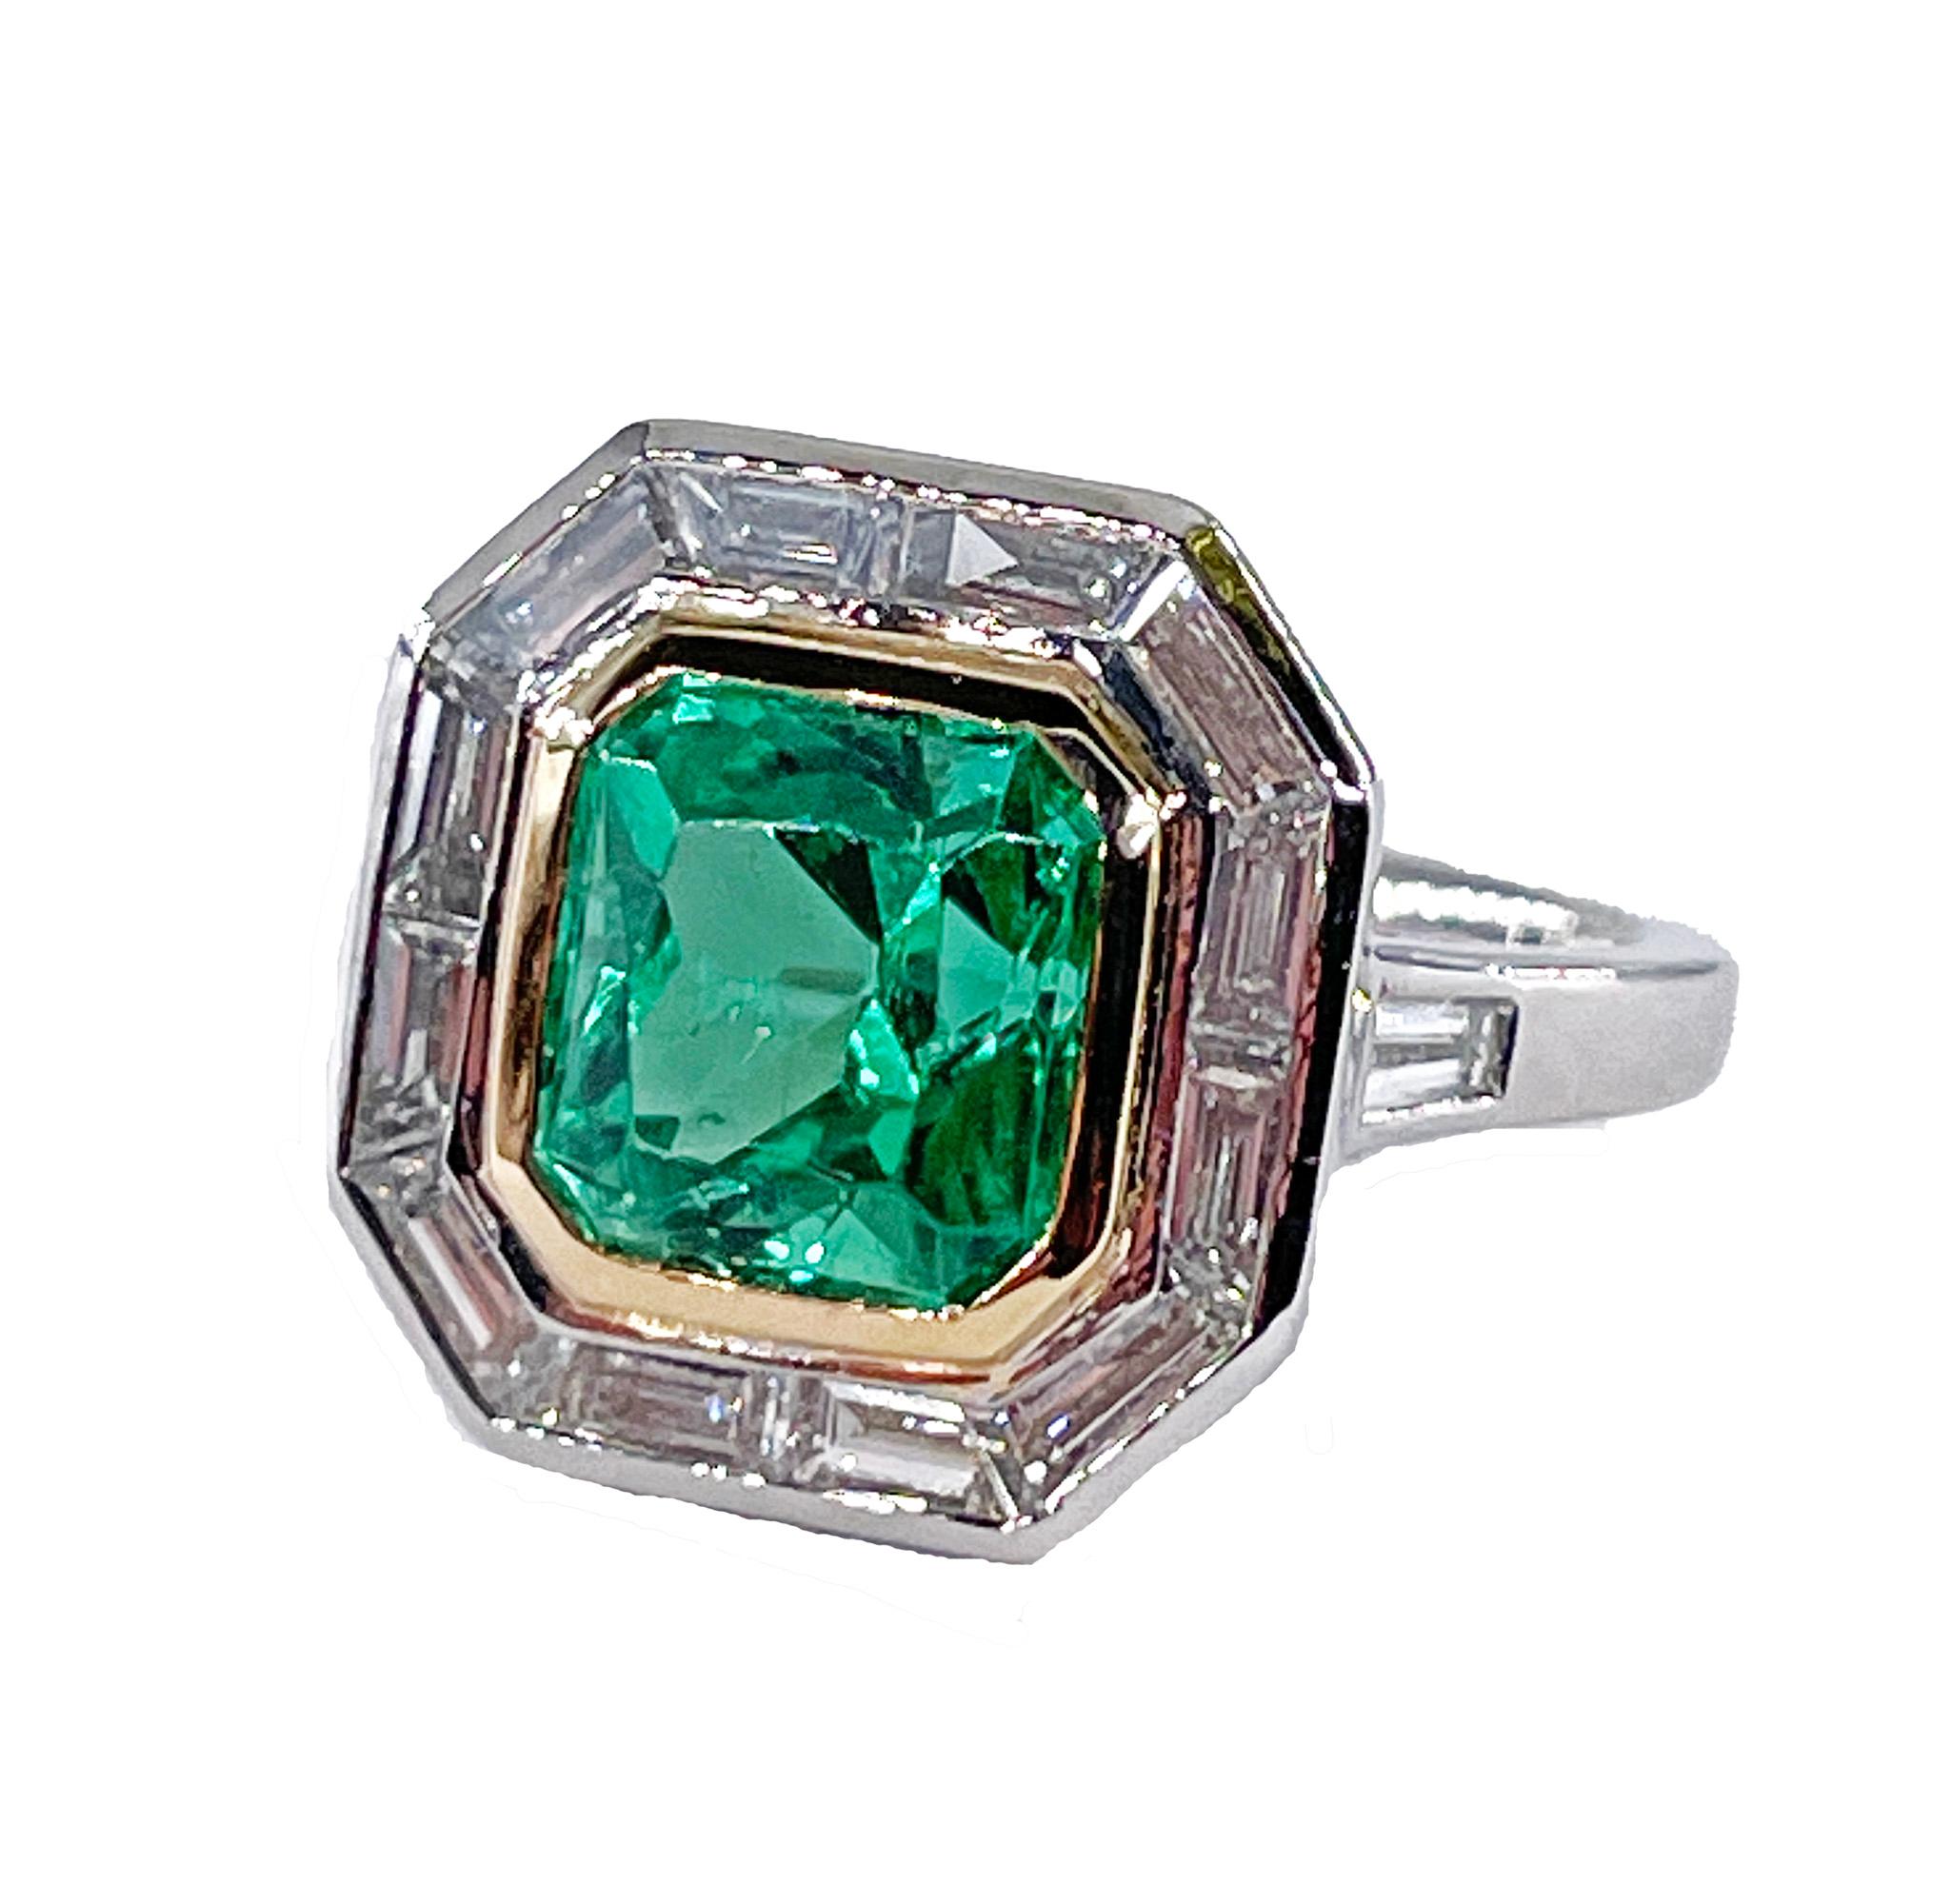 Rare Insignificant AGL 4.66ctw Natural Green Emerald Diamond Engagement Anniversary Platinum 18K Ring

This captivating green gem Emerald easily earns its reputation as the King of Jewels. If you’re looking for something other than a diamond to add